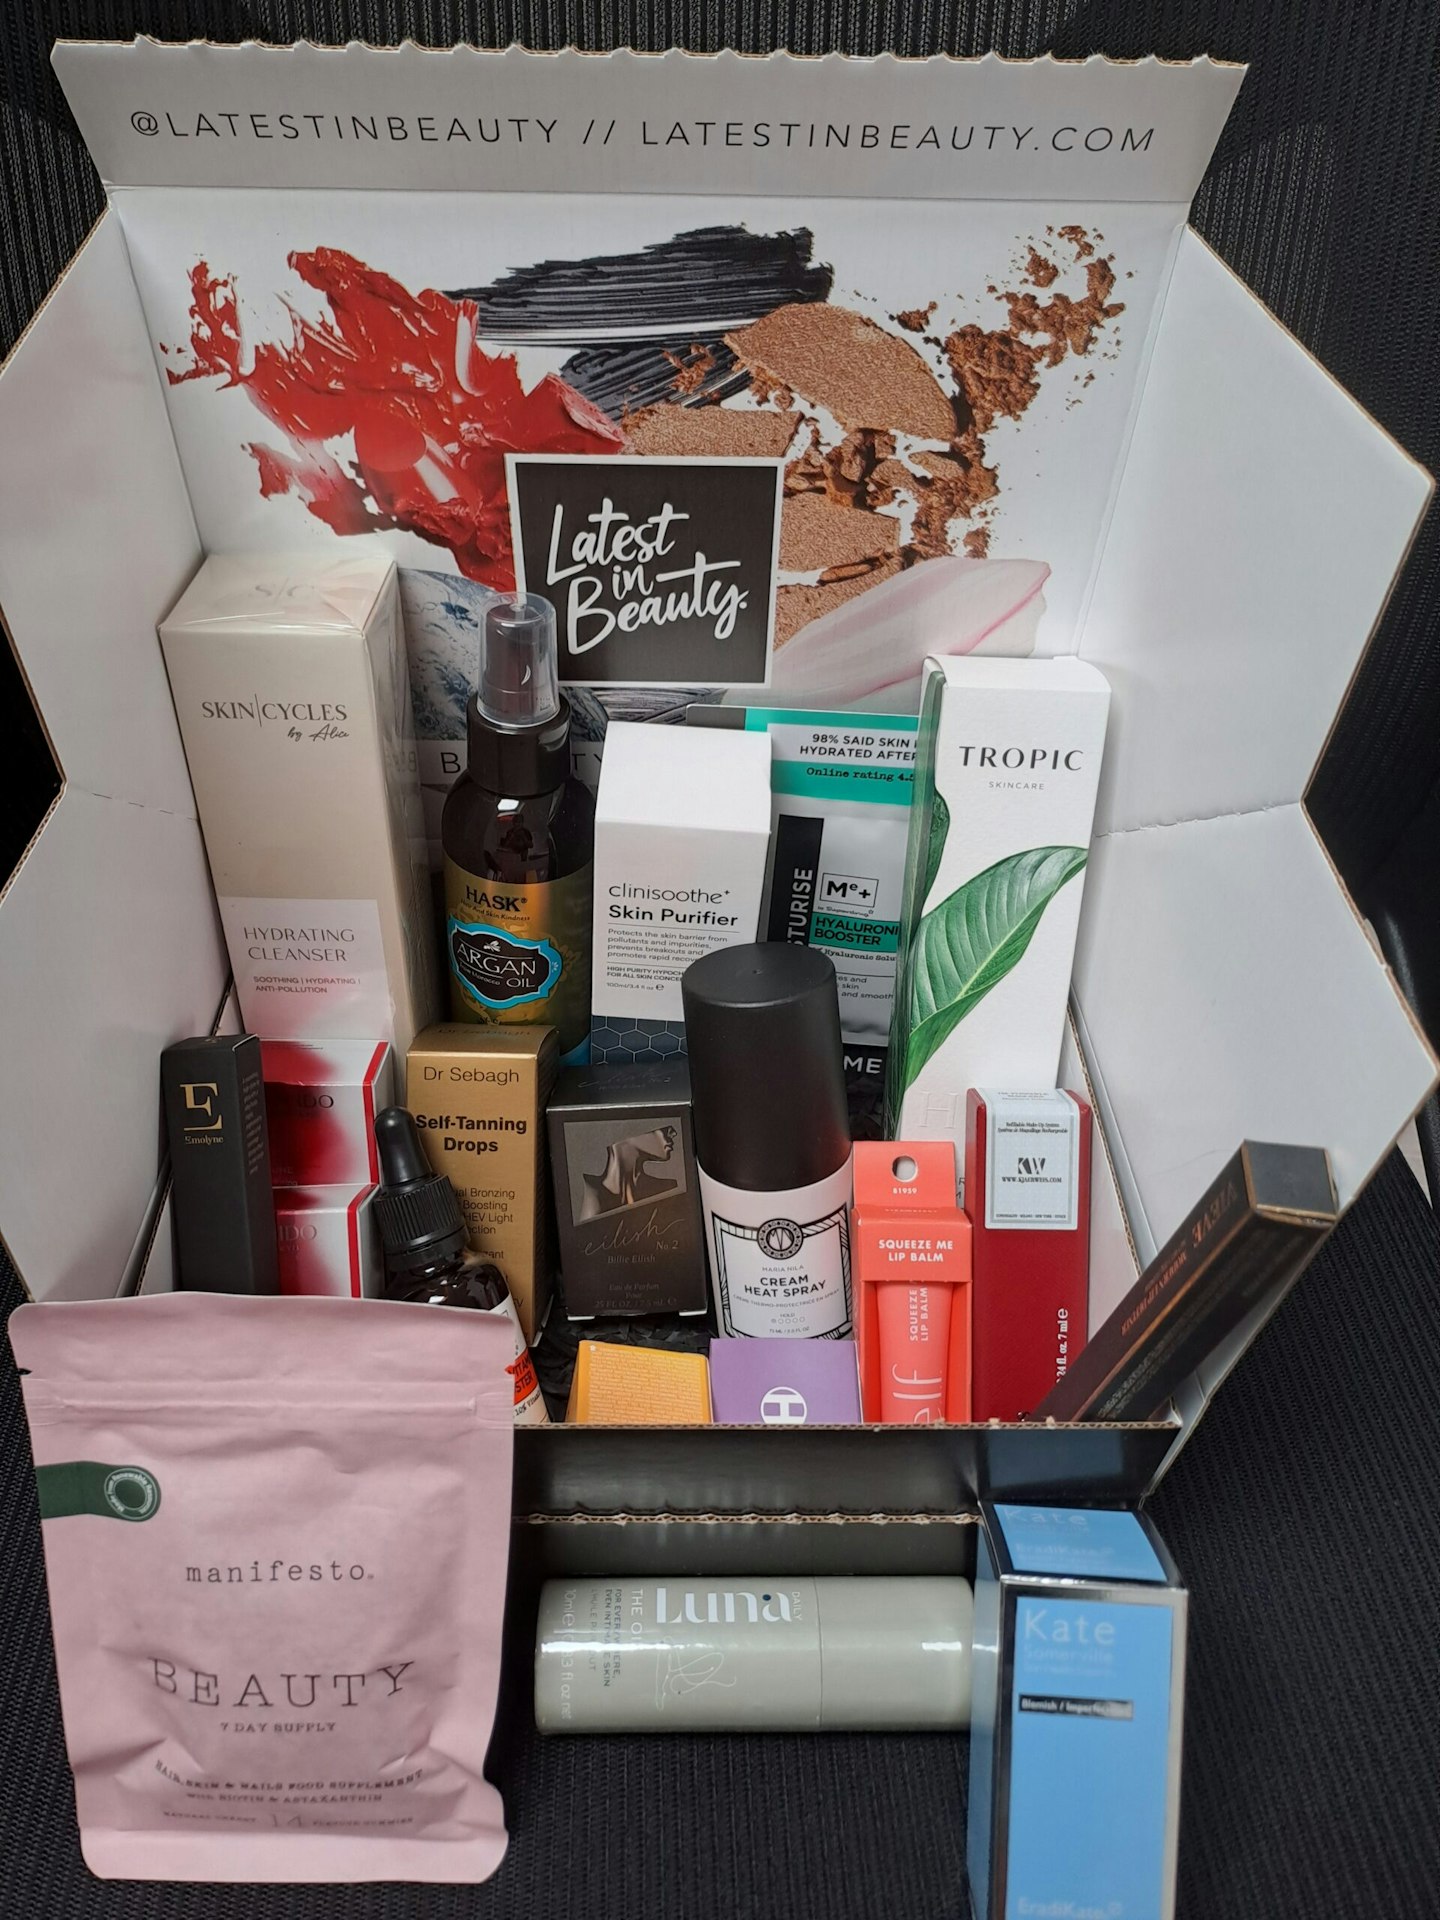 What's Hot - Summer Edition beauty box by Latest in Beauty 